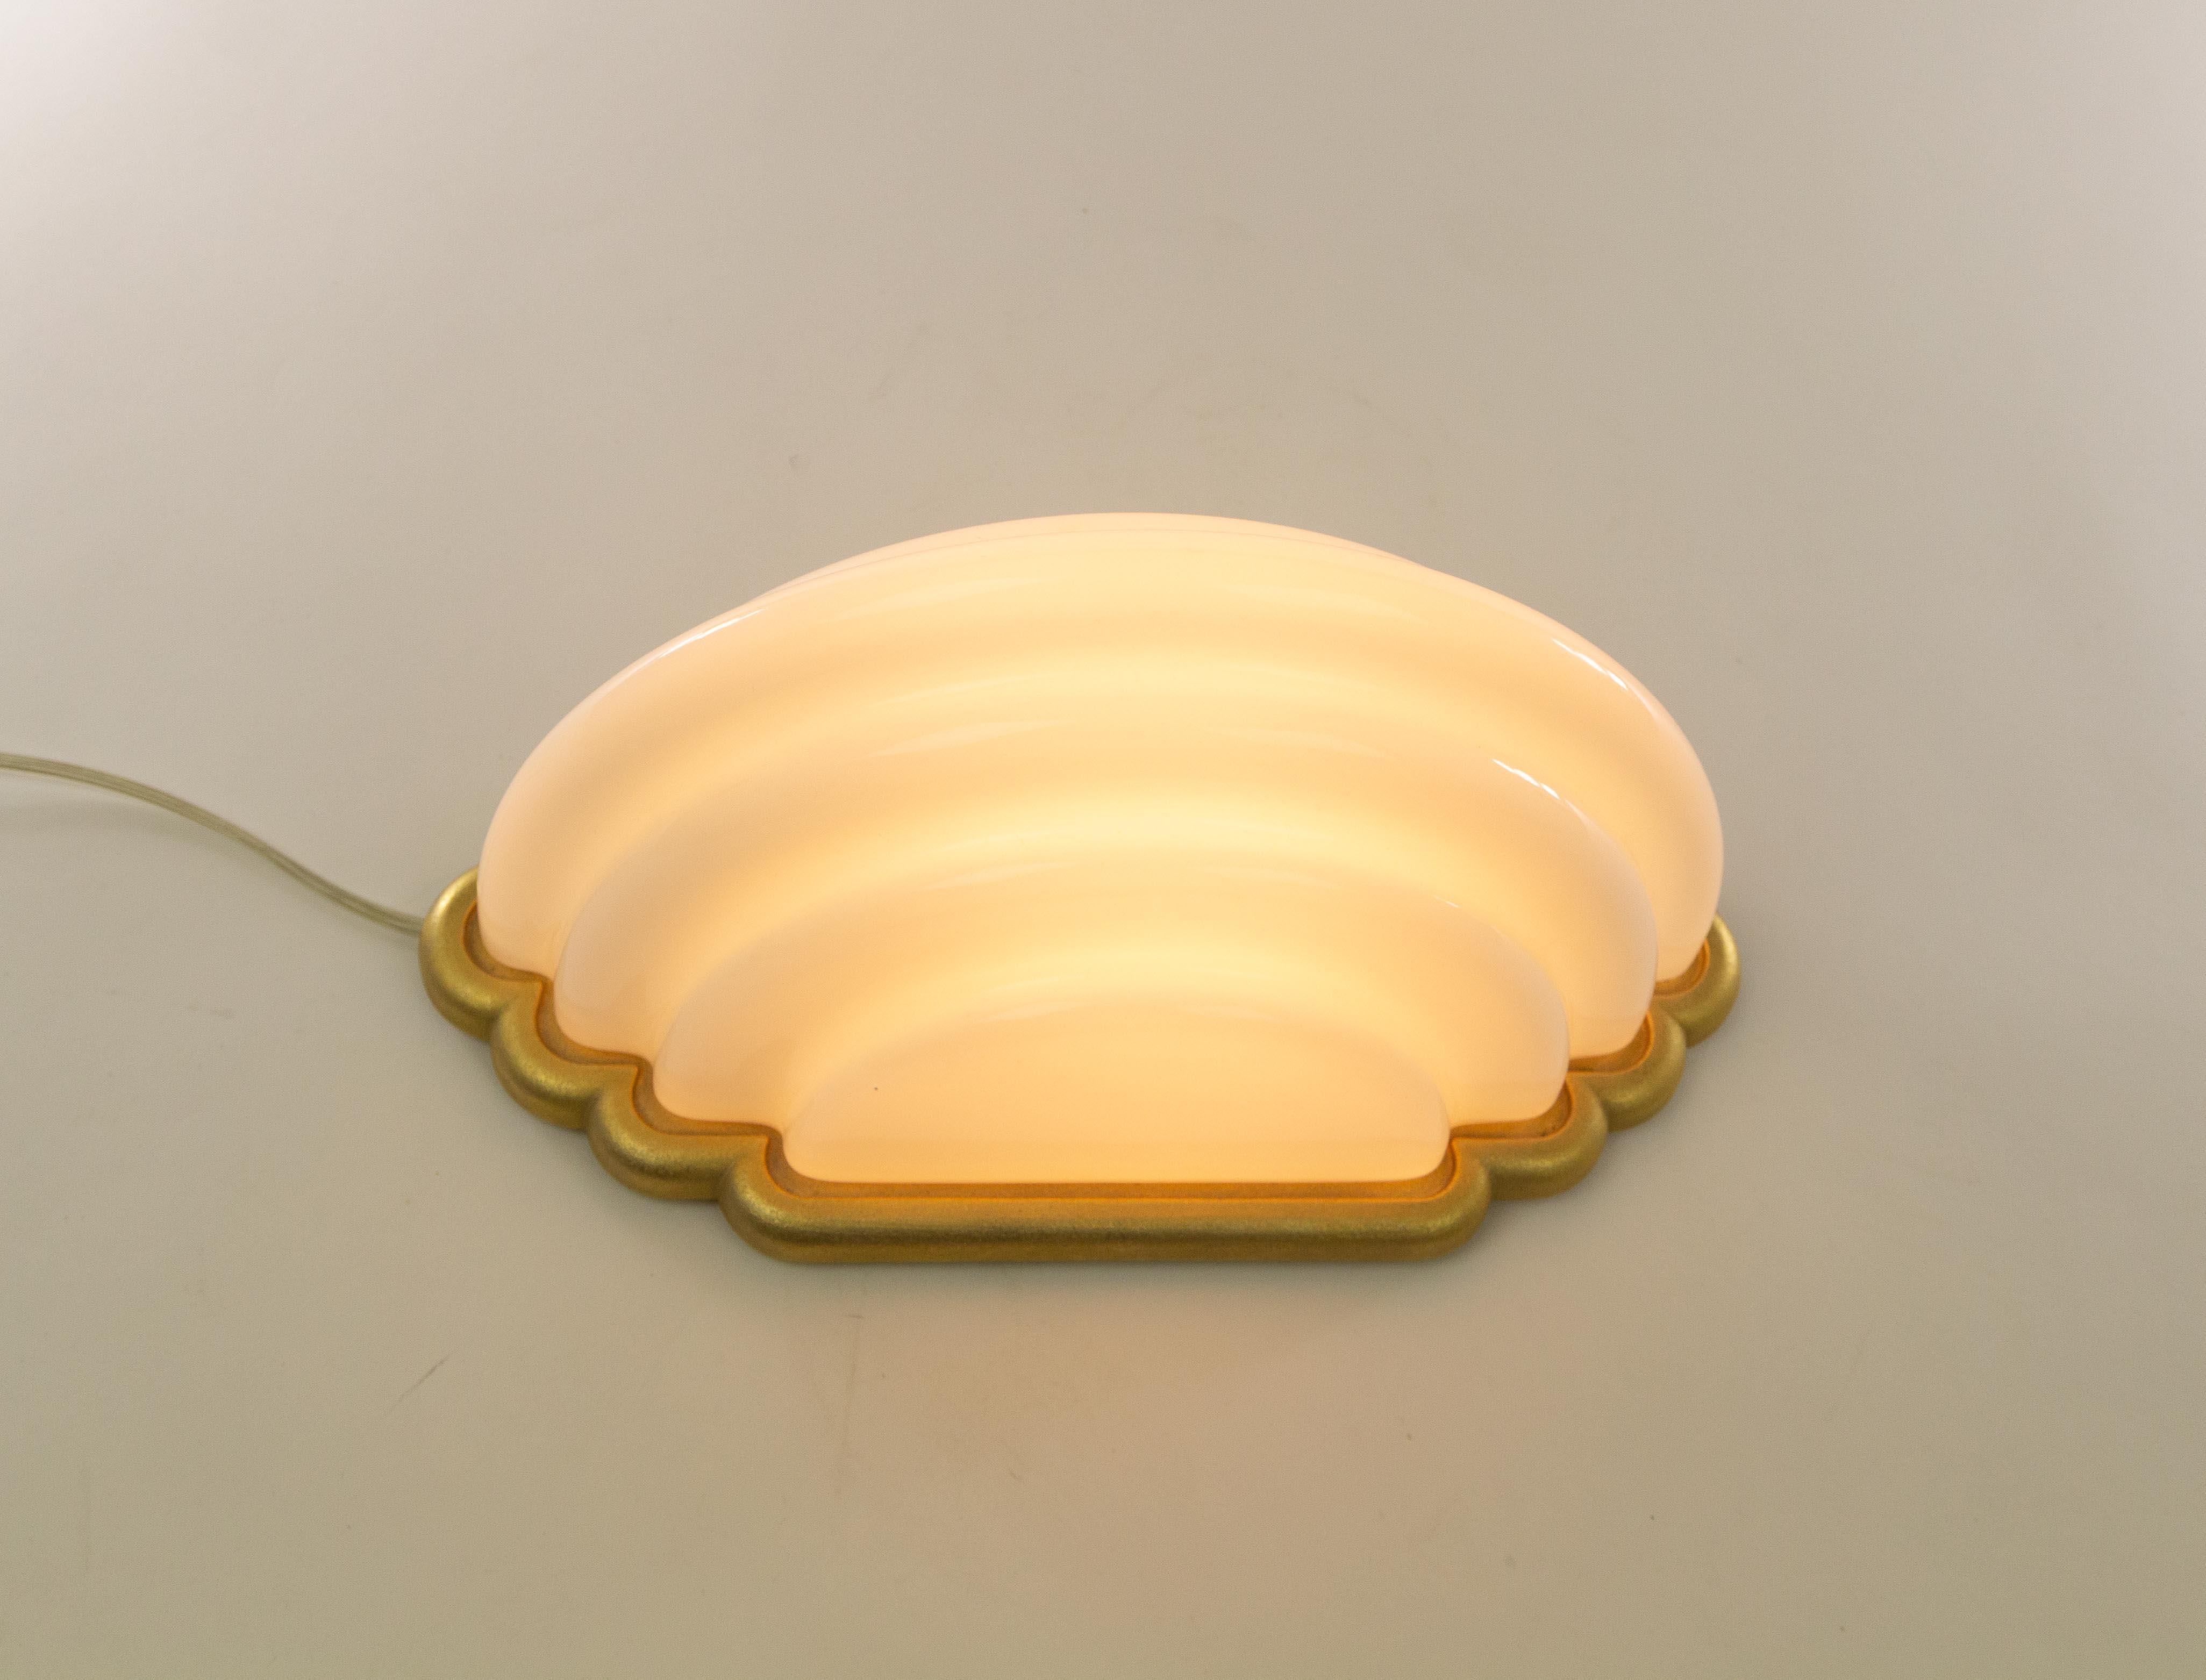 Kumo table lamp designed by Kazuhide Takahama and produced by Sirrah in 1985.

The model consists of an opaline glass shade and a rare gold colored metal base.

Literature: Domus No. 657, Article 'Rassegna Speciale Euroluce', January 1985.